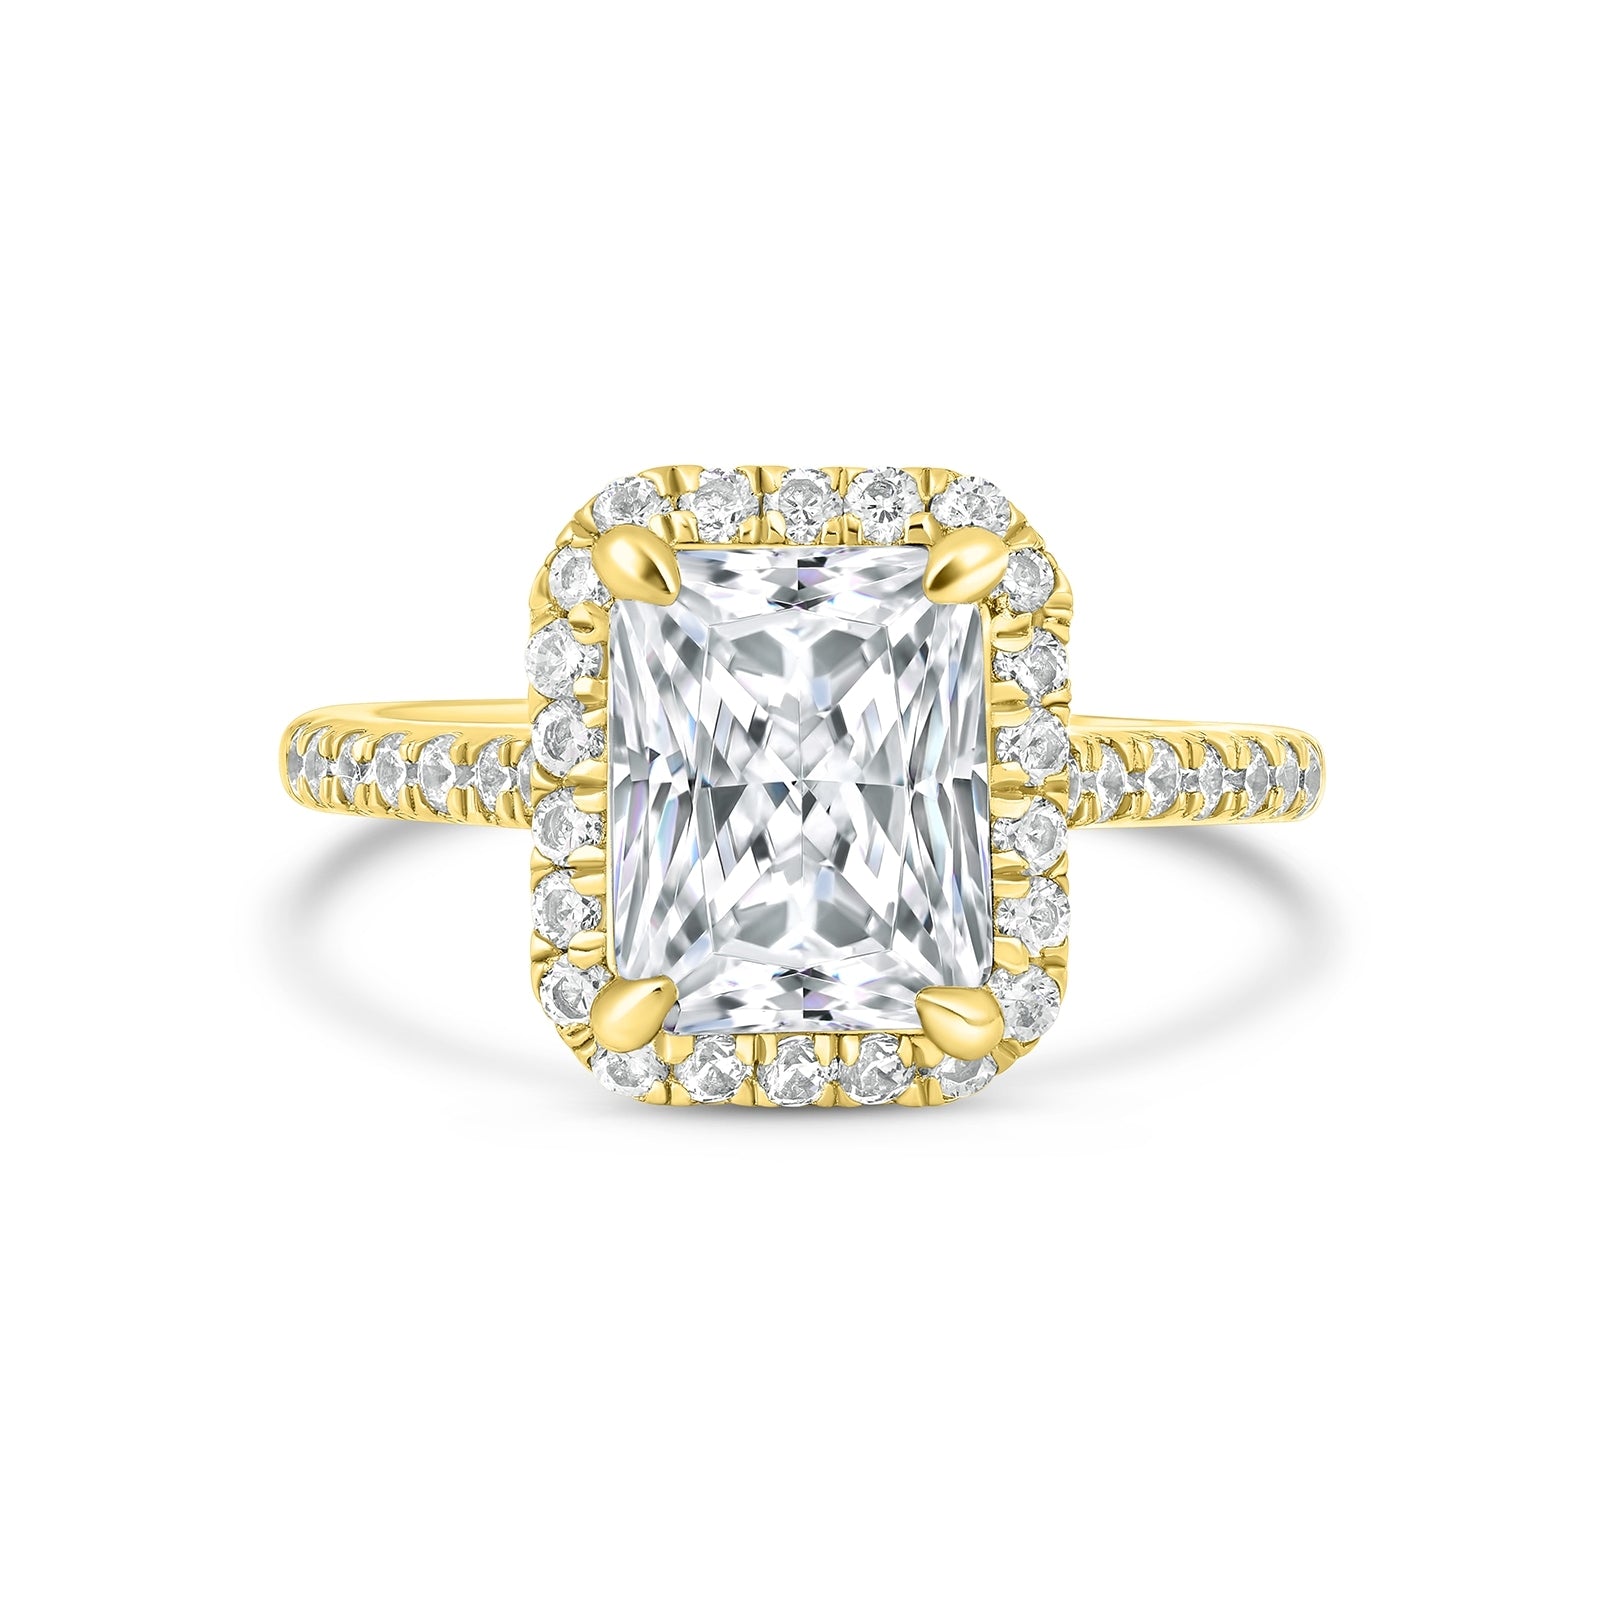 3.5 carat gold radiant halo engagement ring with half eternity band detailing